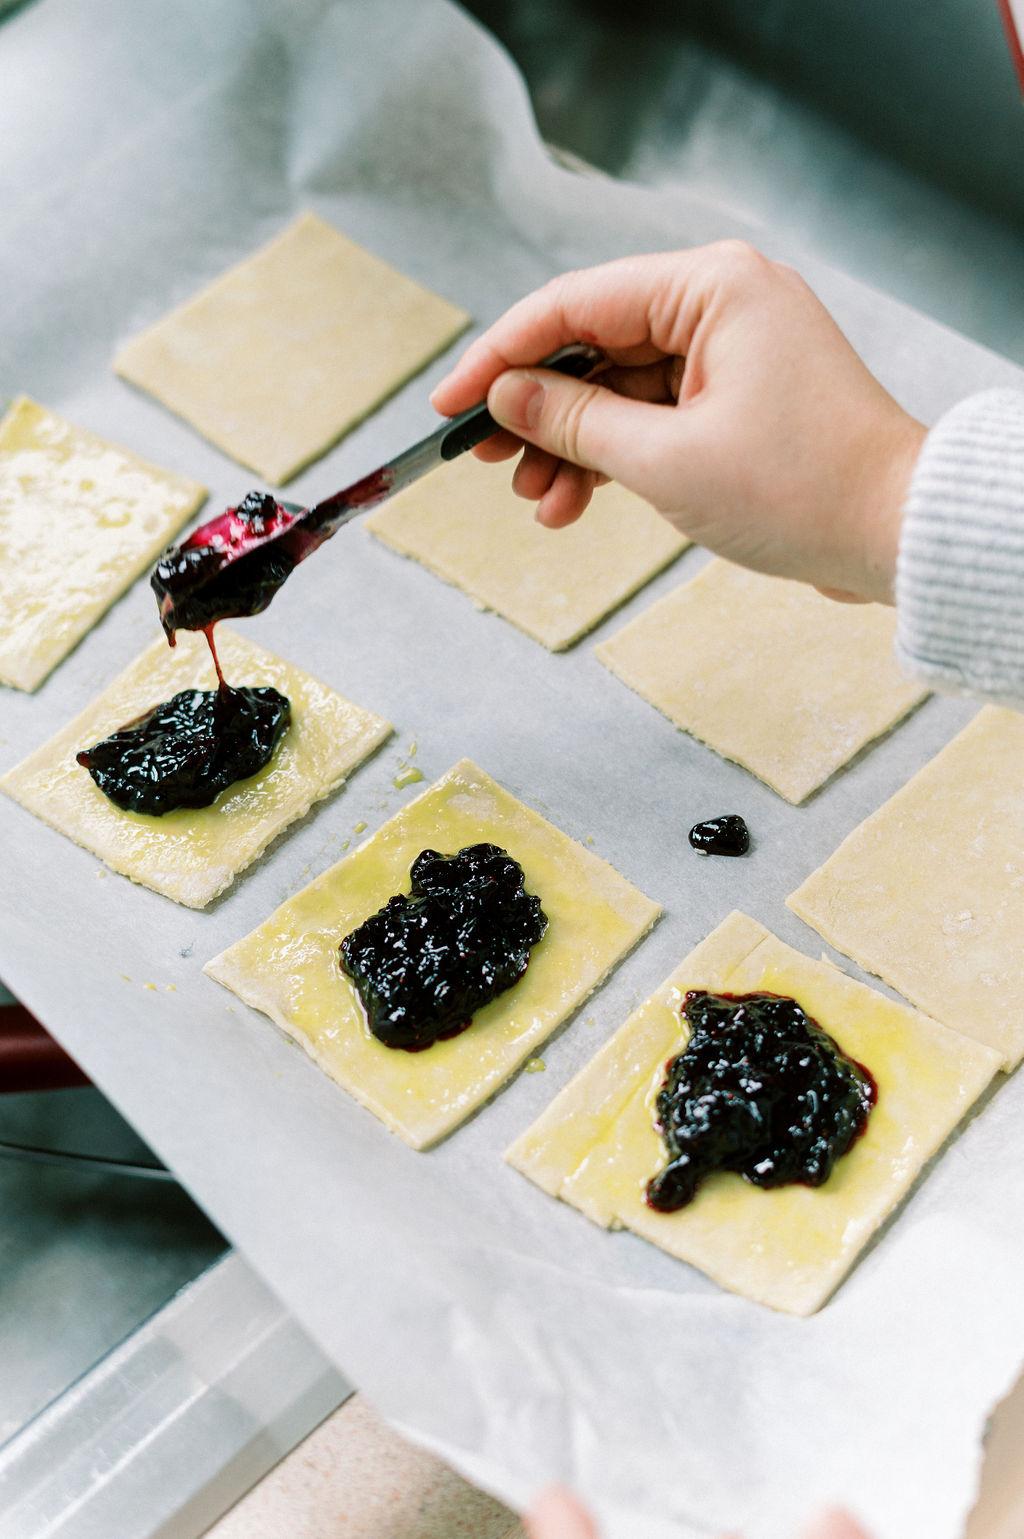 Dolloping jam filling onto the centers of the tarts. (Matt Genders Photography)